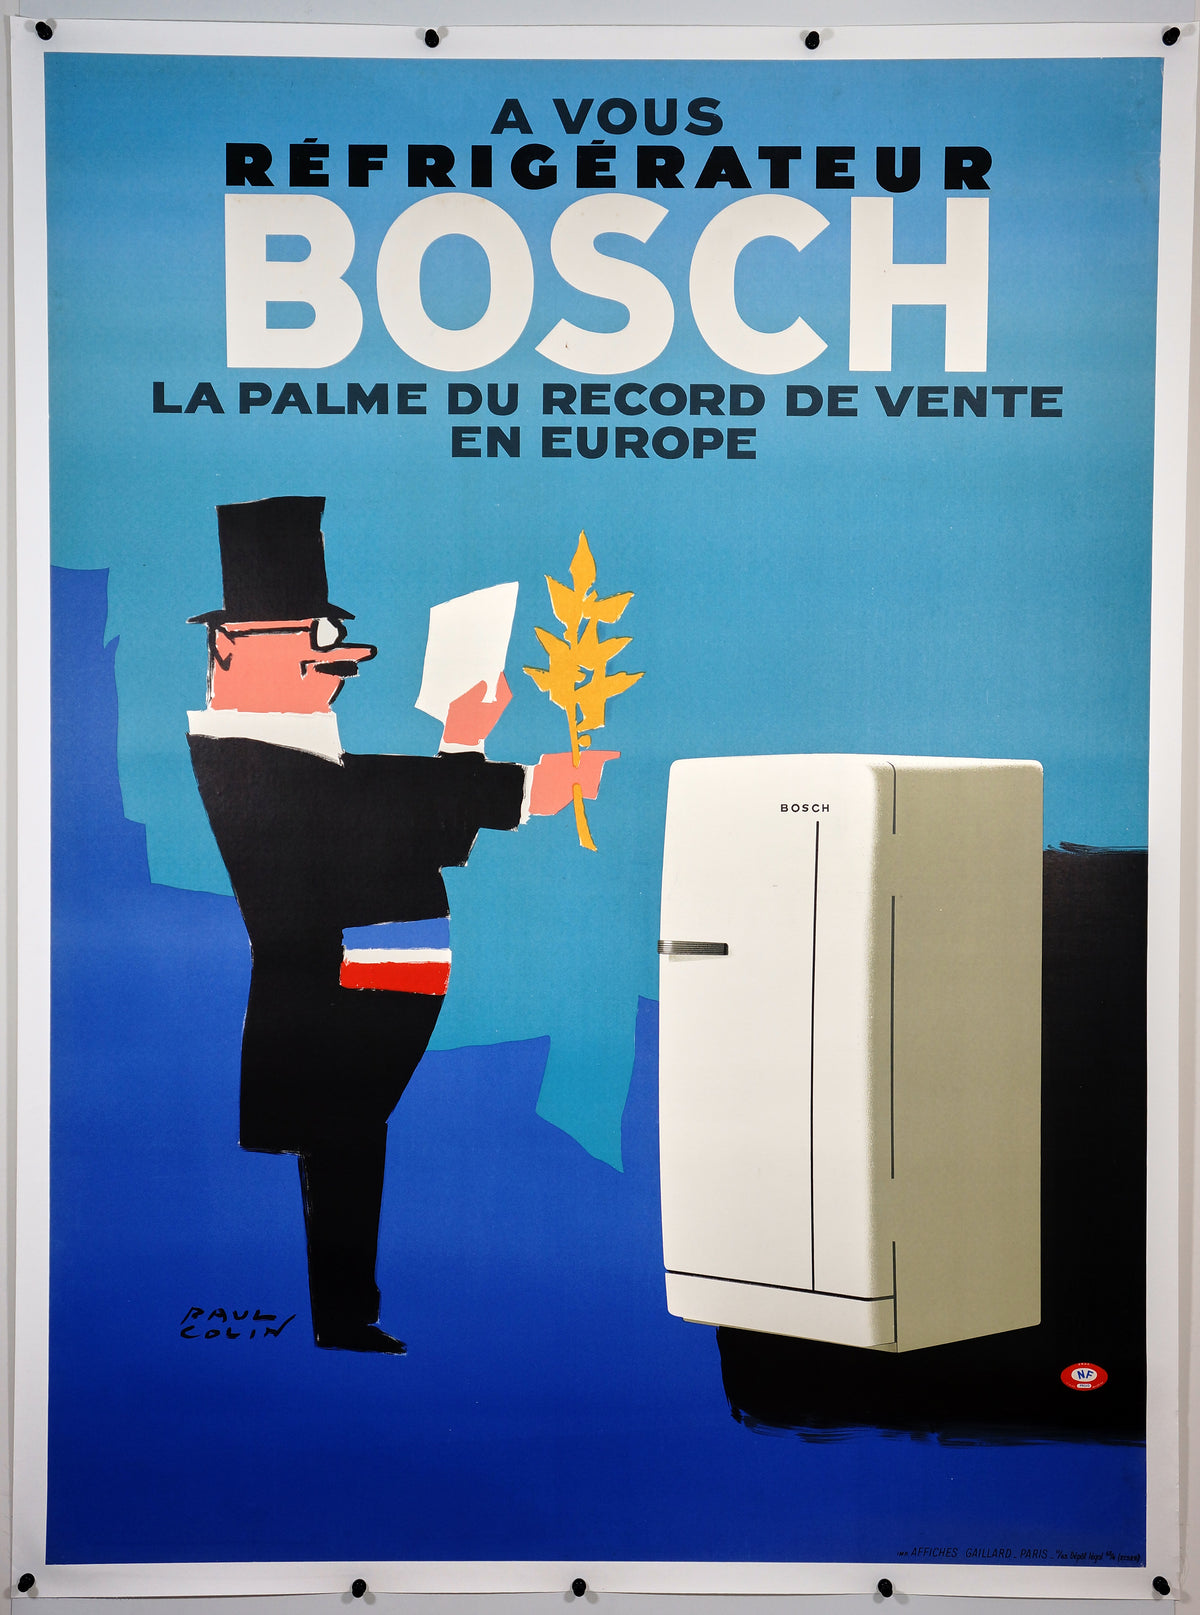 Bosch Refrigerator by Paul Colin - Authentic Vintage Poster